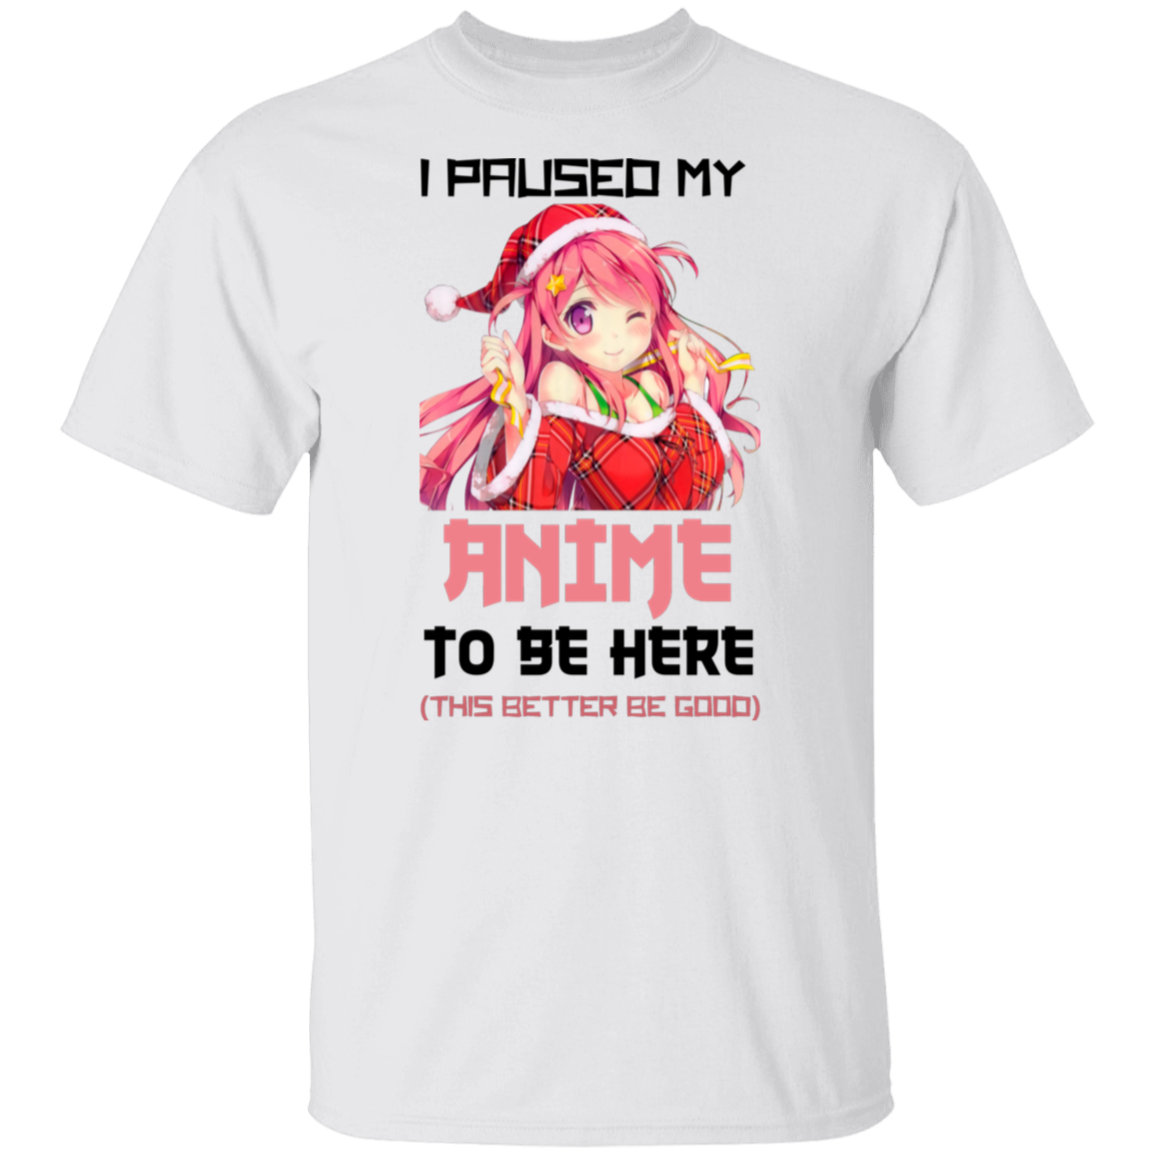 I Paused My ANIME To Be Here - Unisex T-Shirt